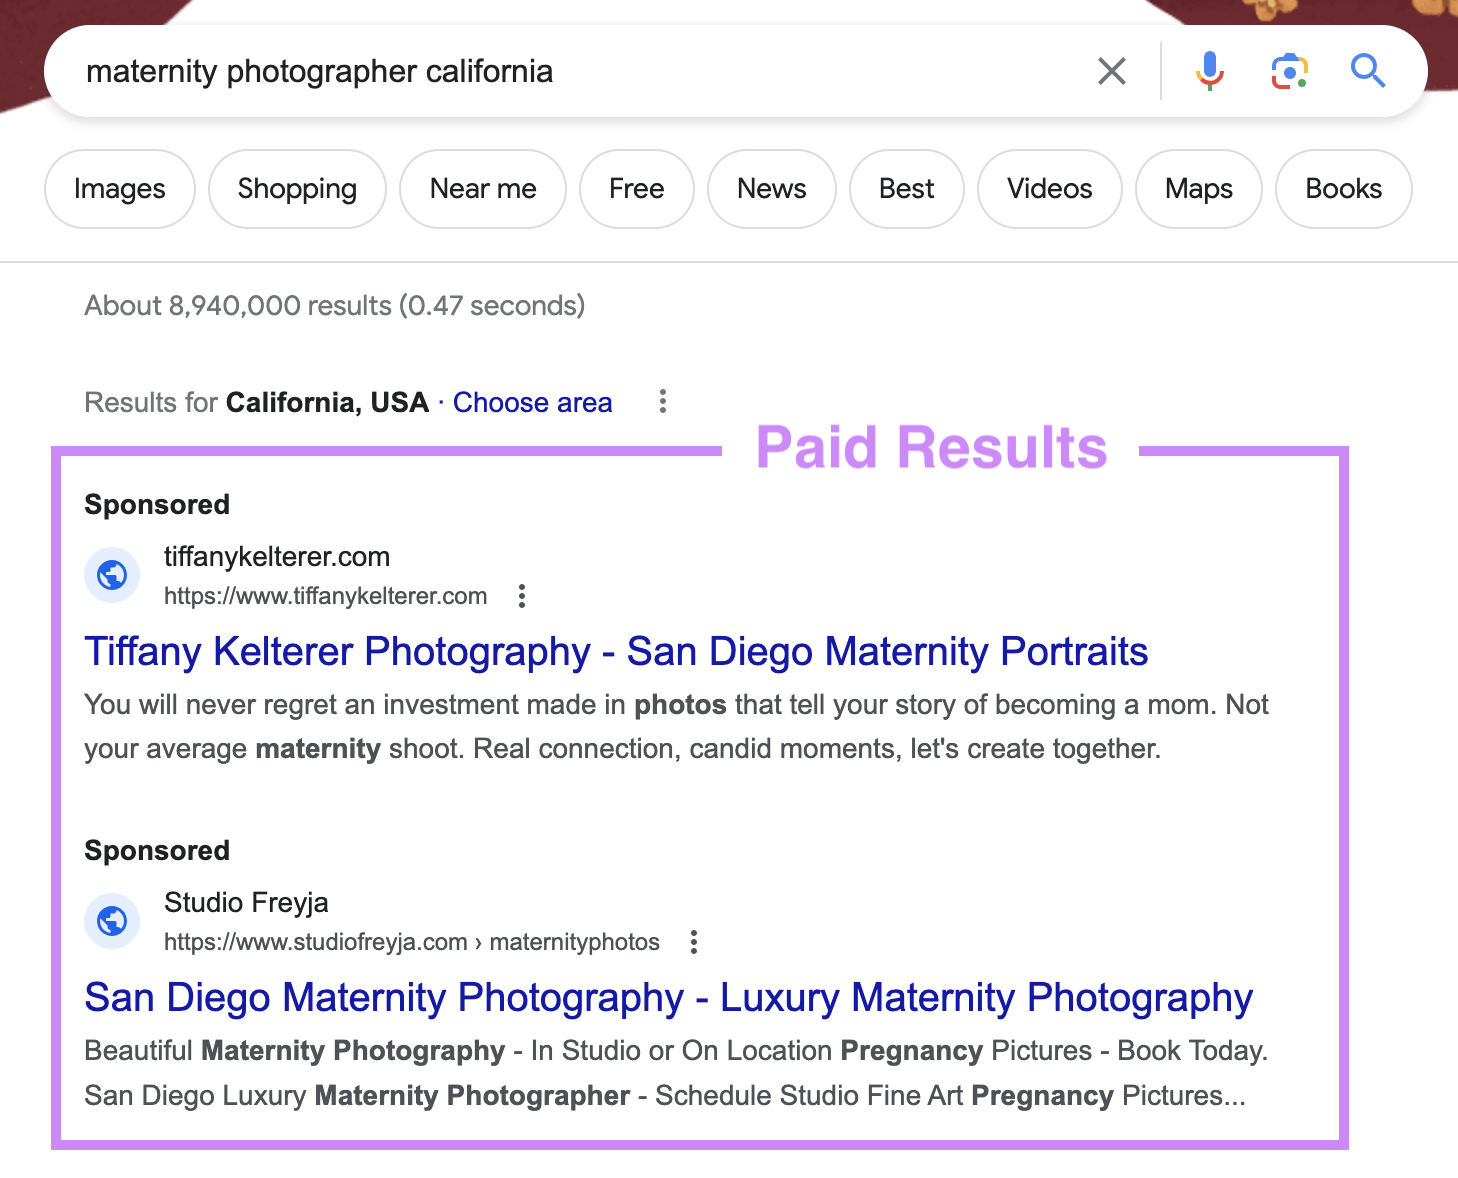 Paid results on Google for "maternity photographer california" query